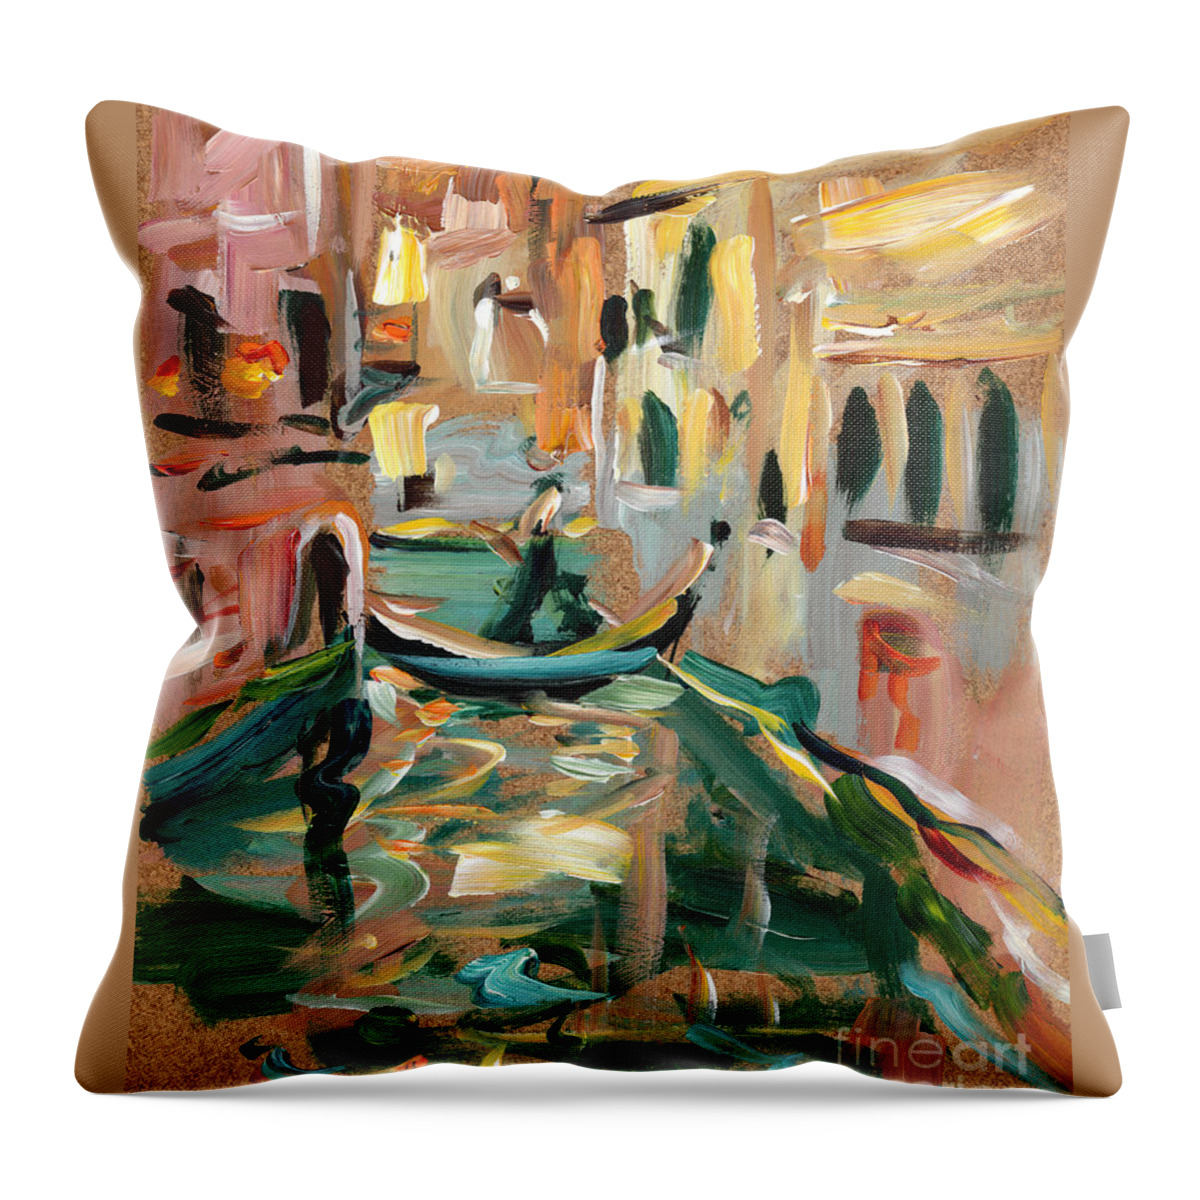 Great Painting Throw Pillow featuring the painting Venice Canal by Valerie Freeman